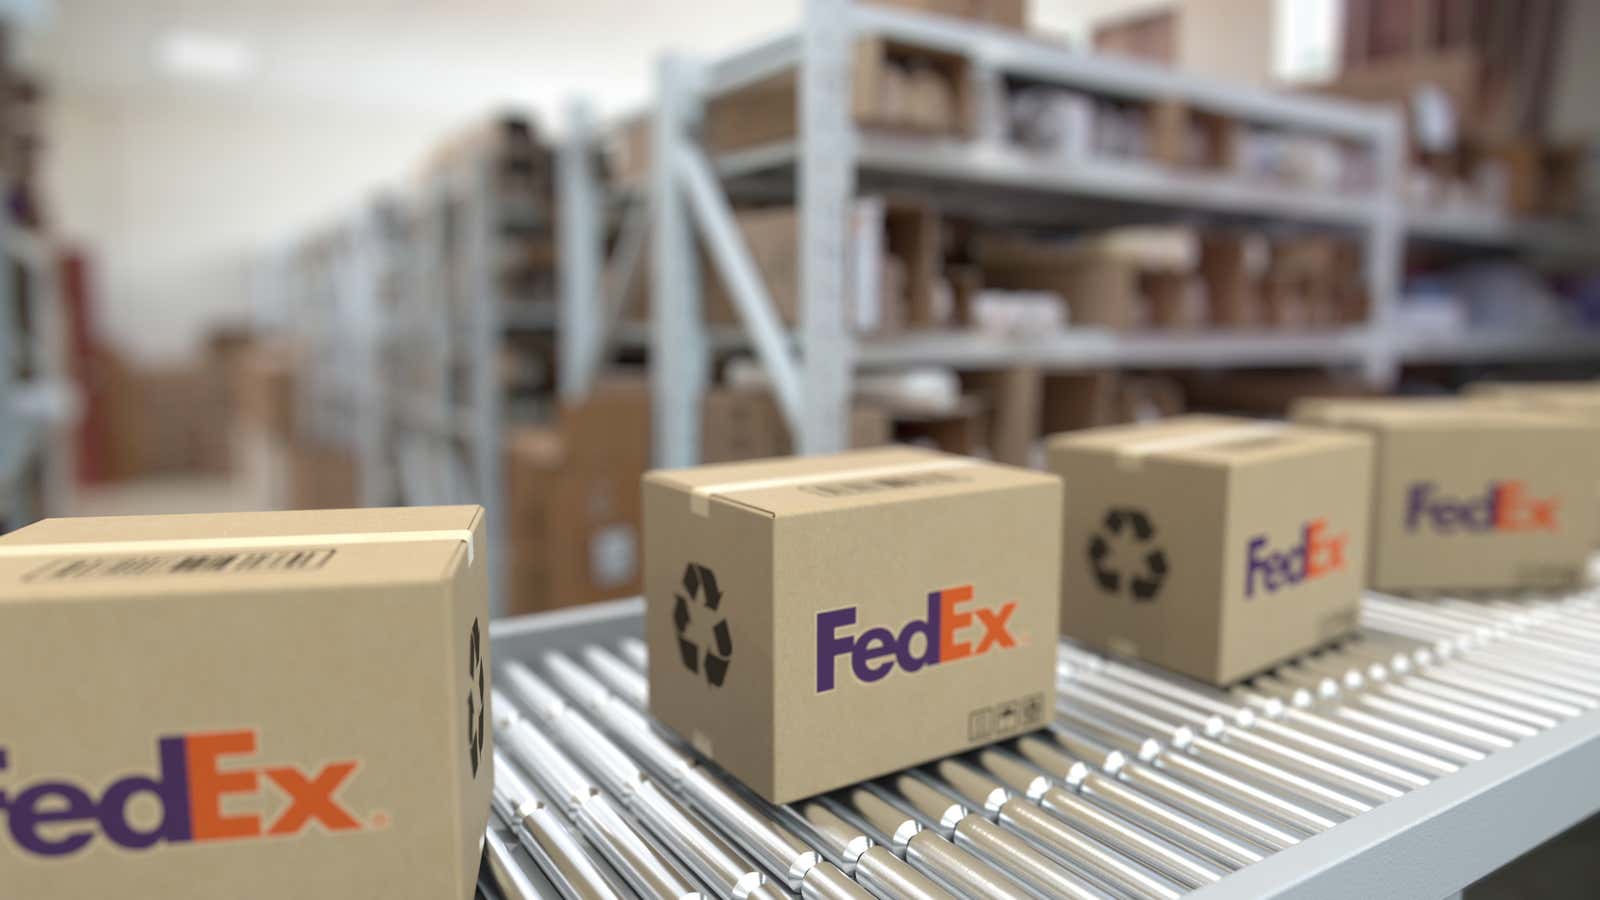 FedEx Worker Praised for Response to Racist Attack